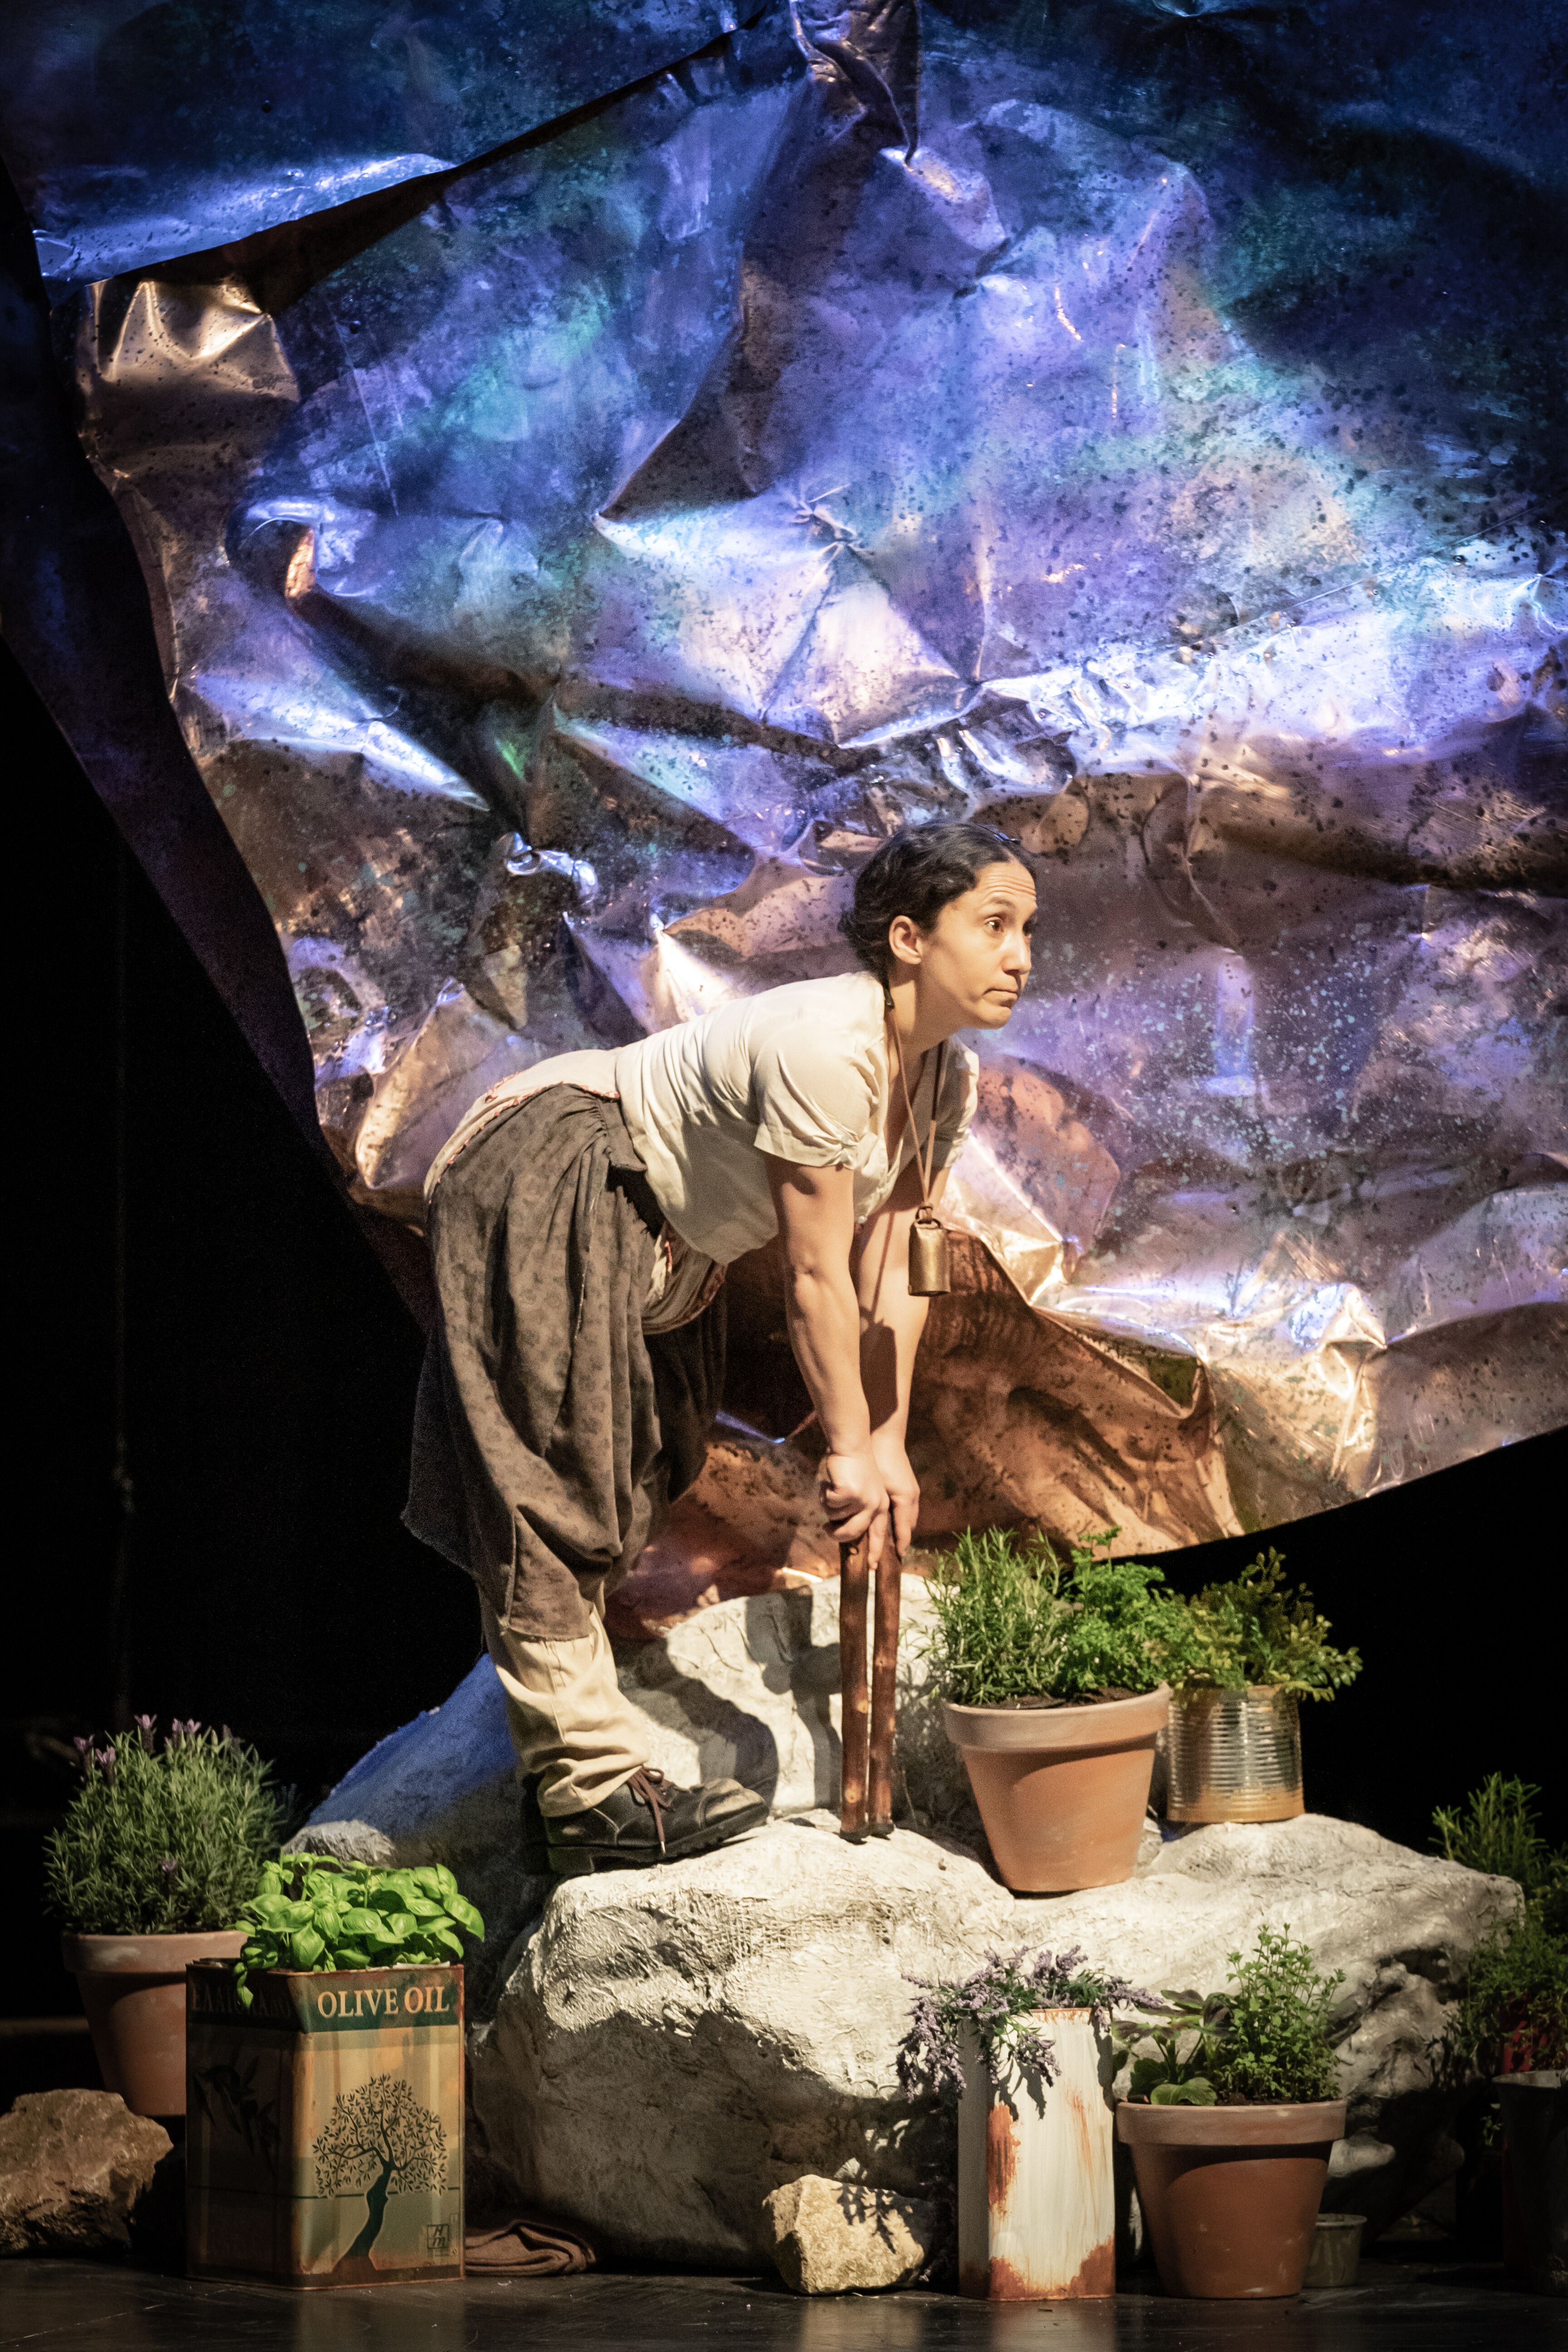 Cast members on stage digging up her garden